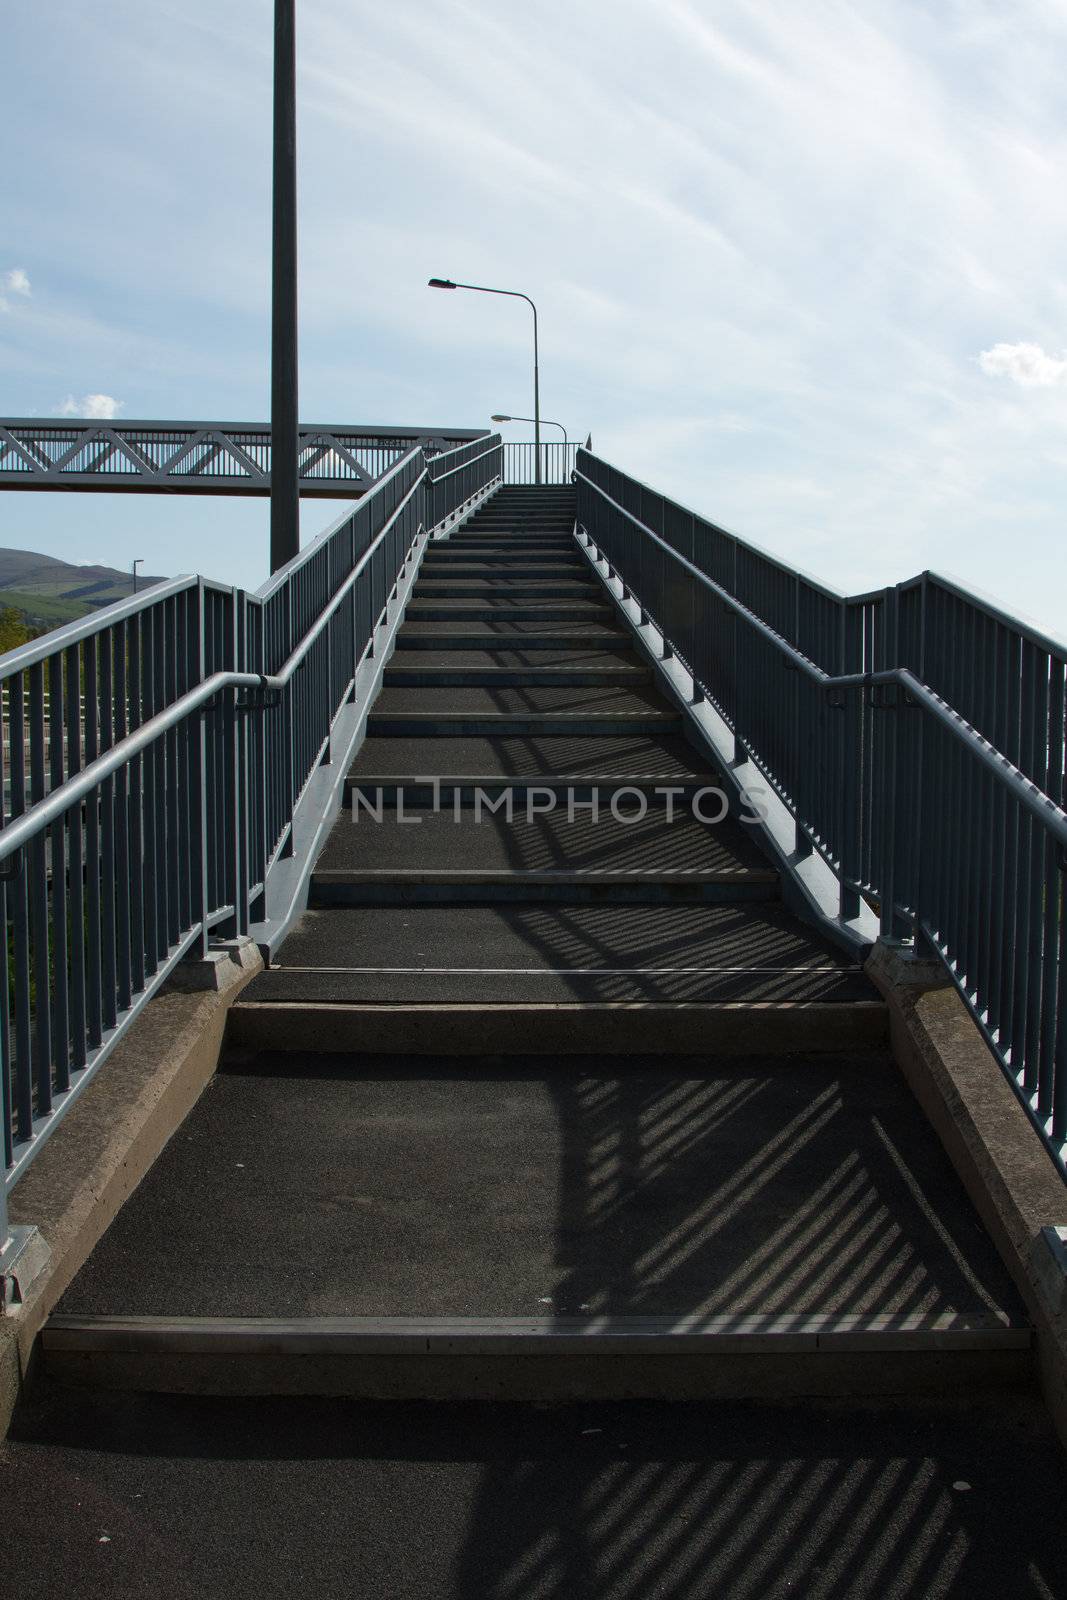 Steps leading to a foot bridge with metal railings and  lampposts with a blue sky and whispy clouds in the background.